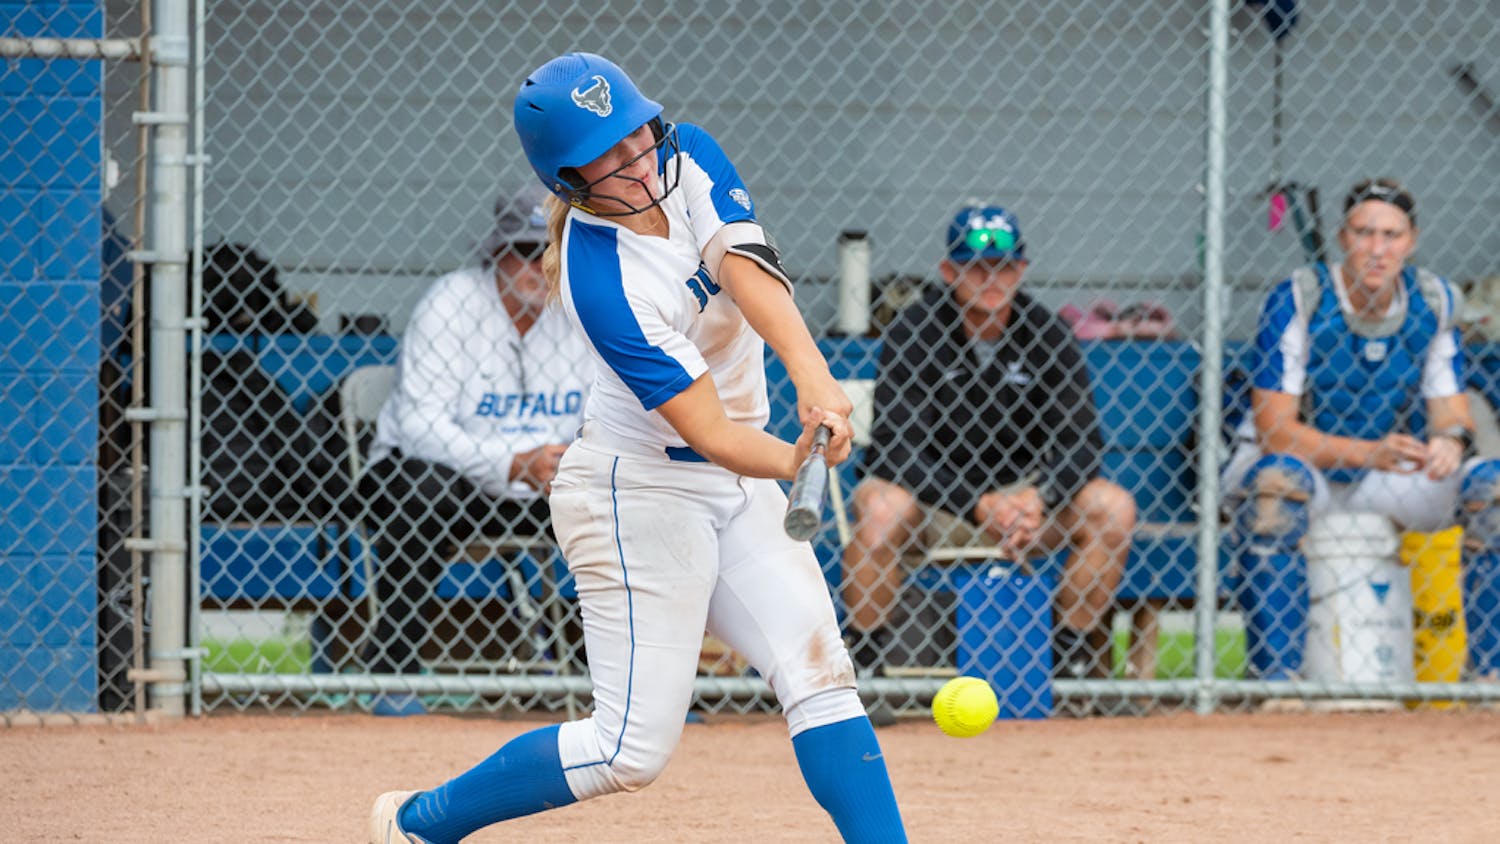 Senior Pitcher Alexis Lucyshyn takes a swing during a 2021 game.